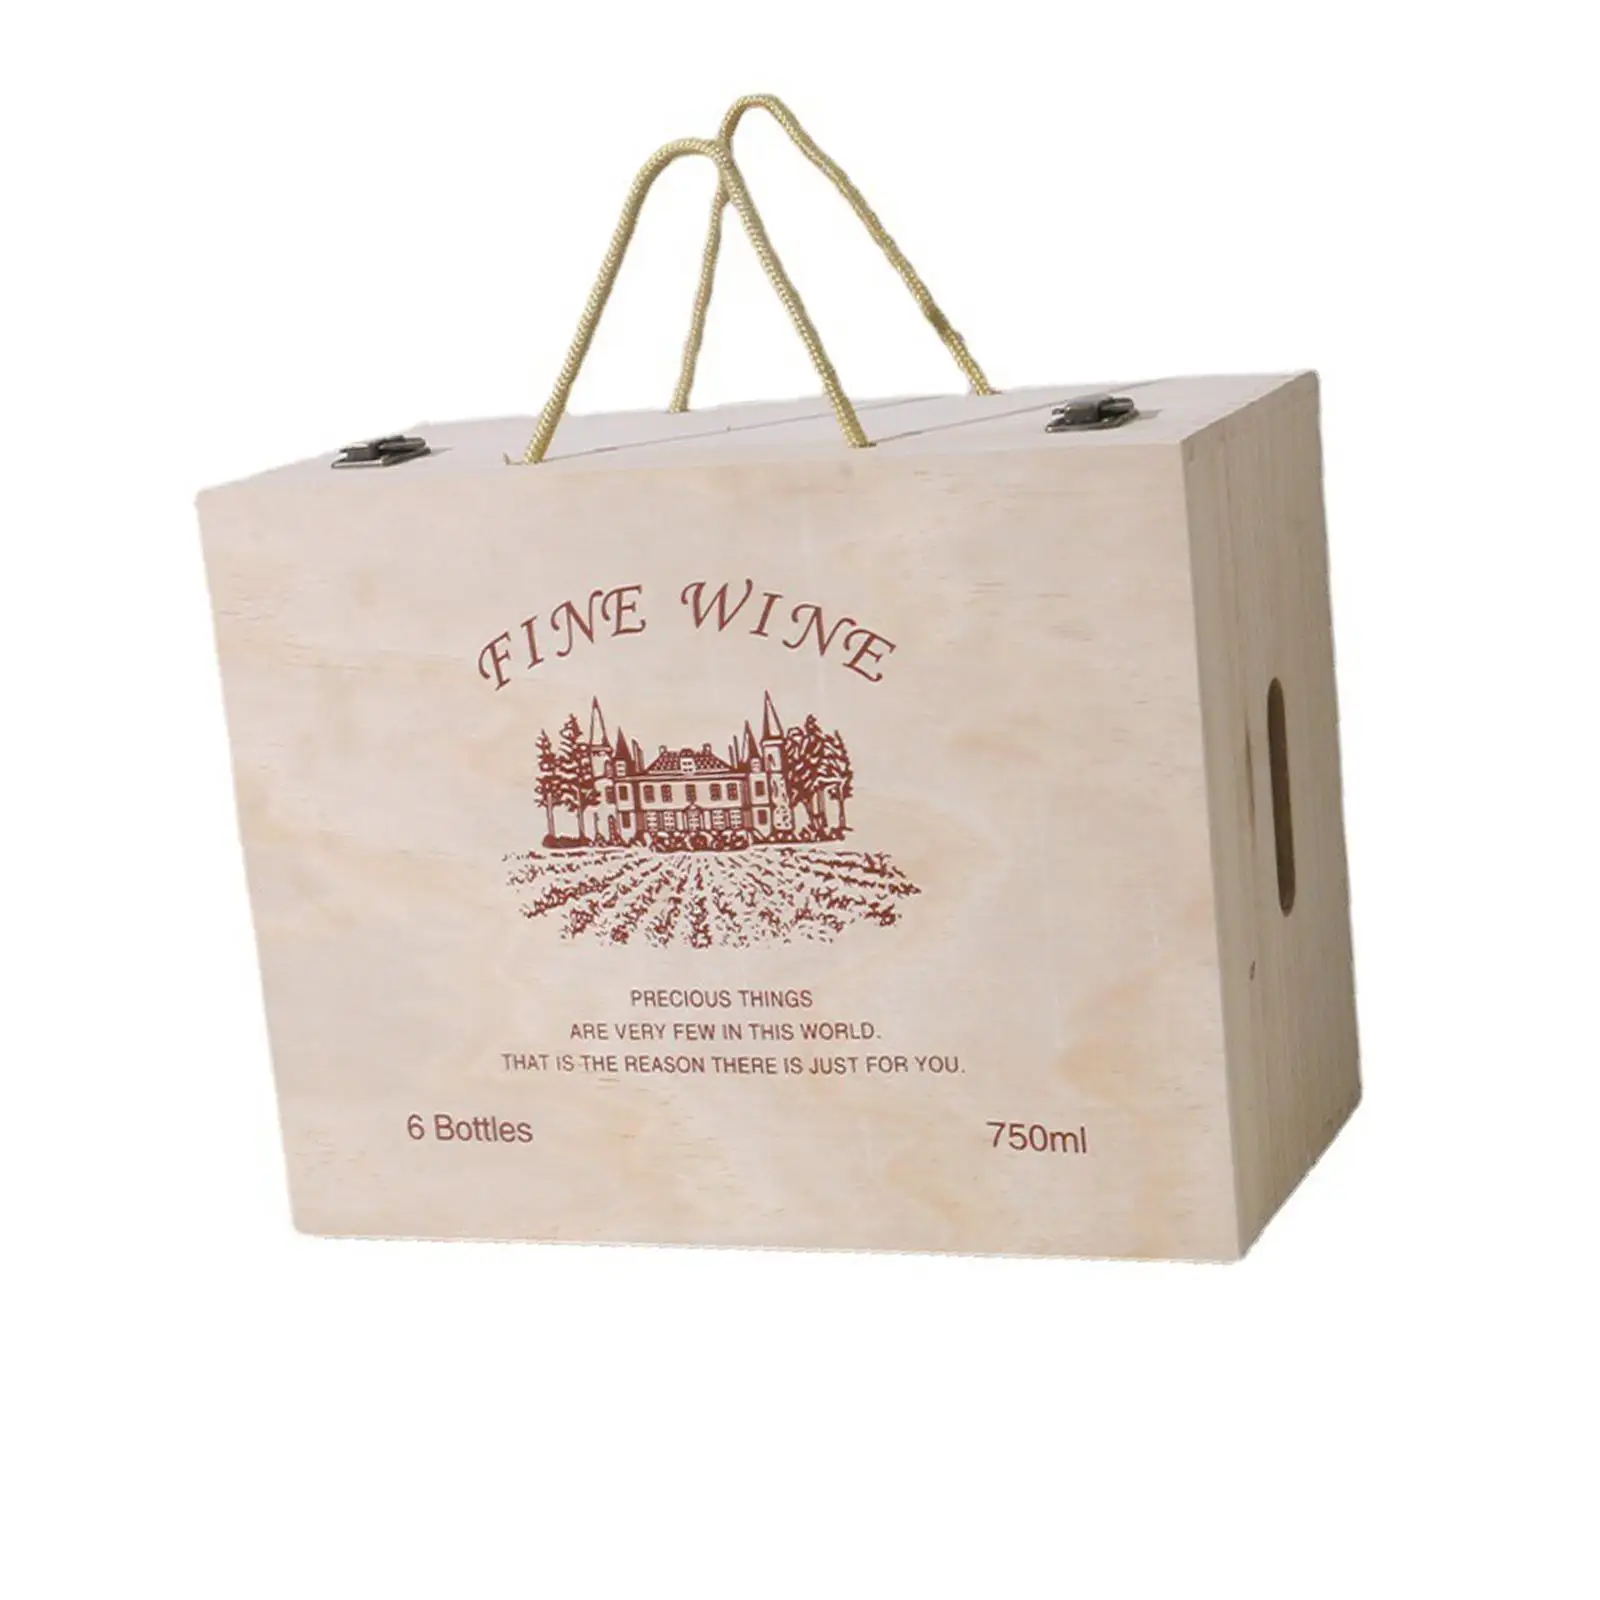 Wine Carrier Portable Wine Accessories Decorative Wooden Wine Gift Box for Christmas Holiday Celebrations Wedding Anniversary